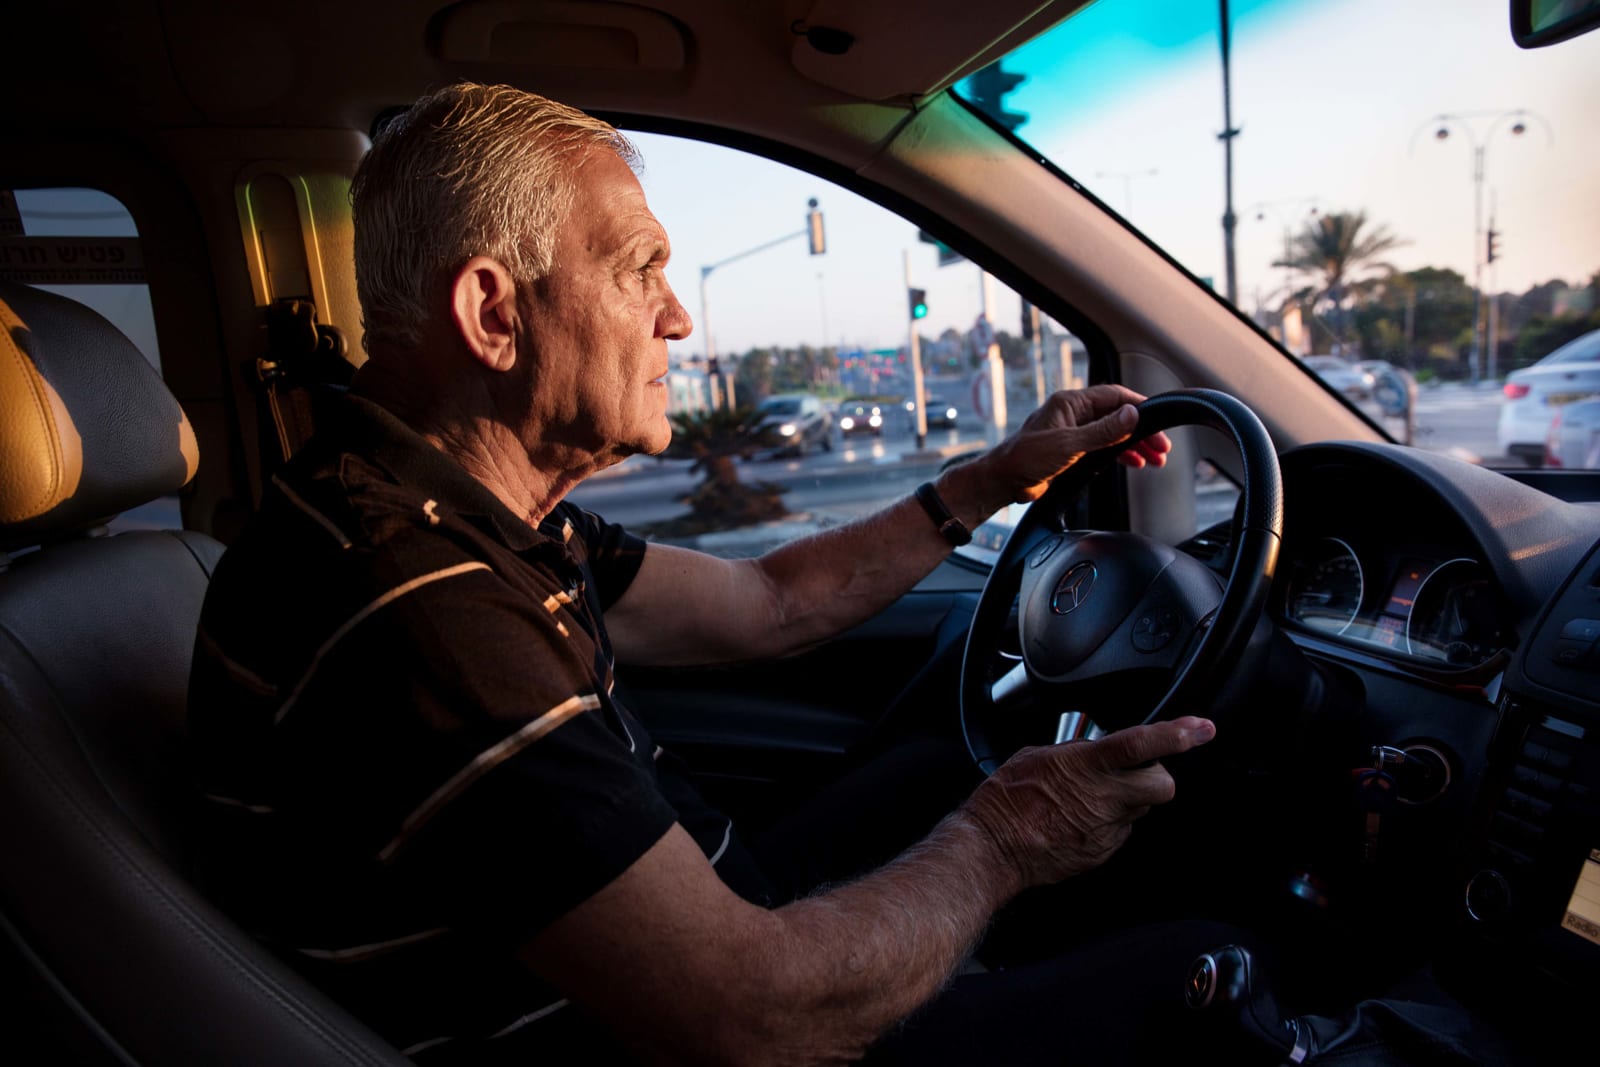 Elinor Carucci photograph of her father driving a taxi cab